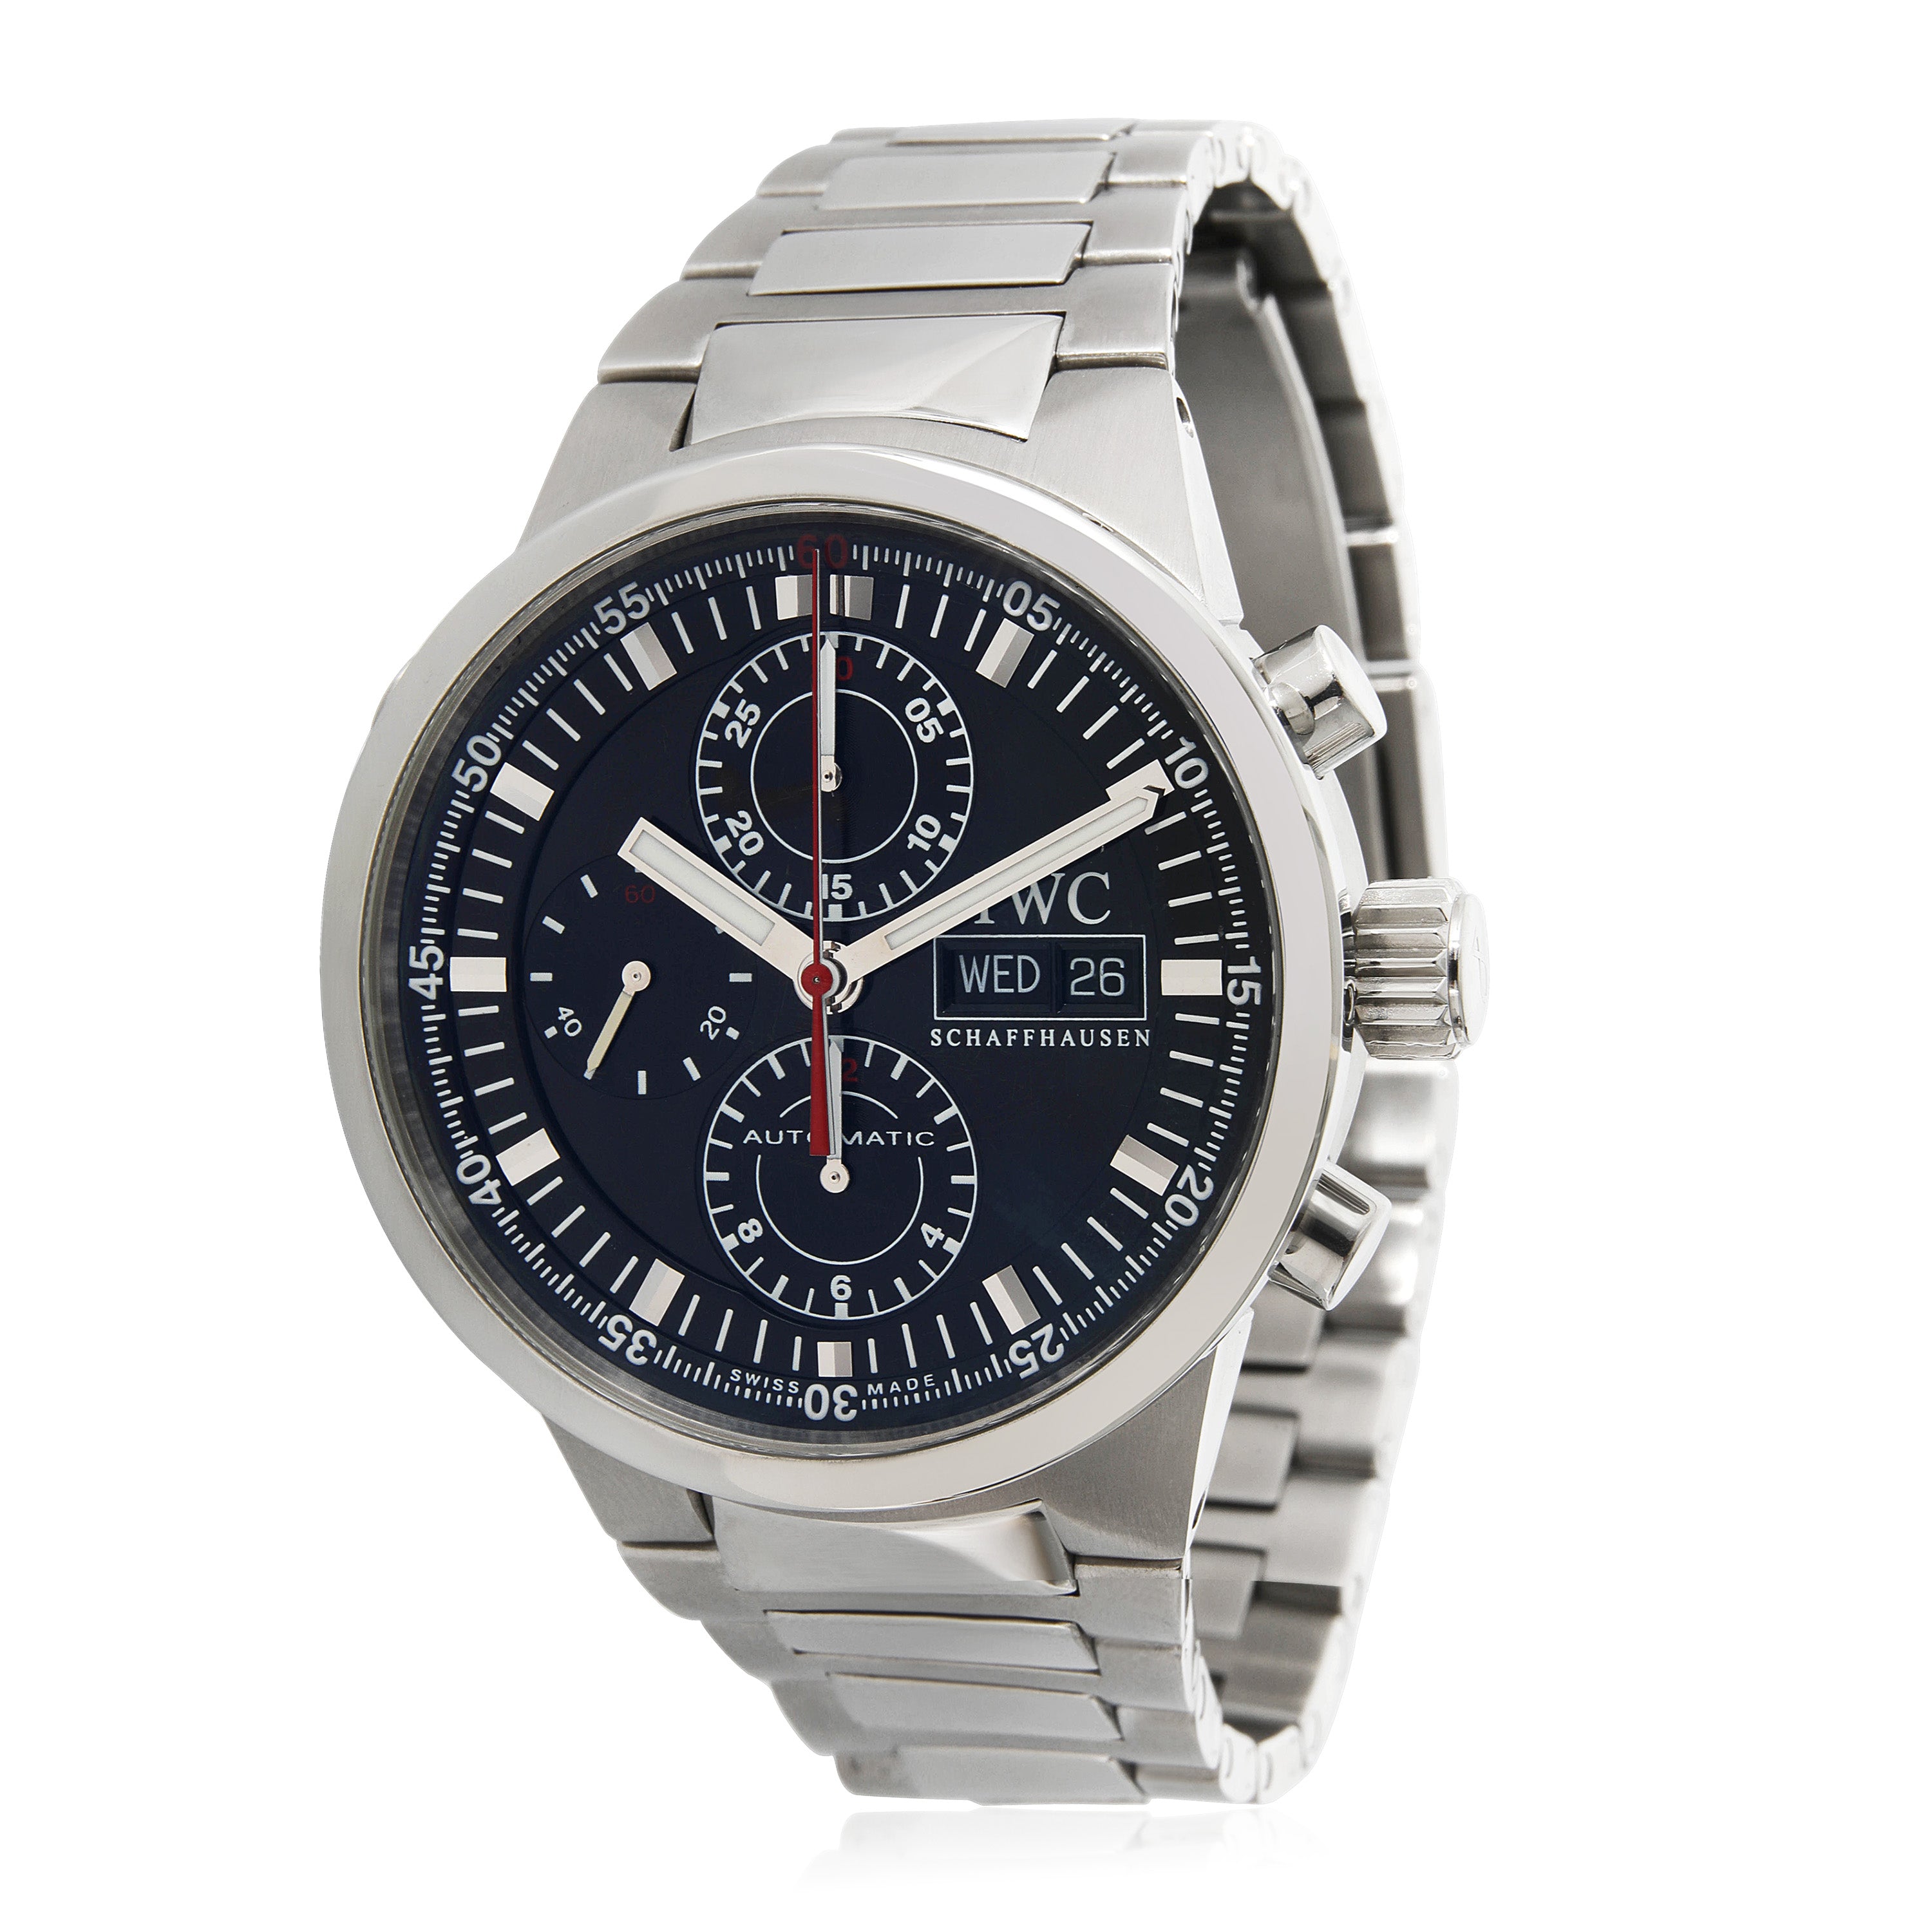 image of IWC GST Rattrapante IW371518 Men's Watch in Stainless Steel